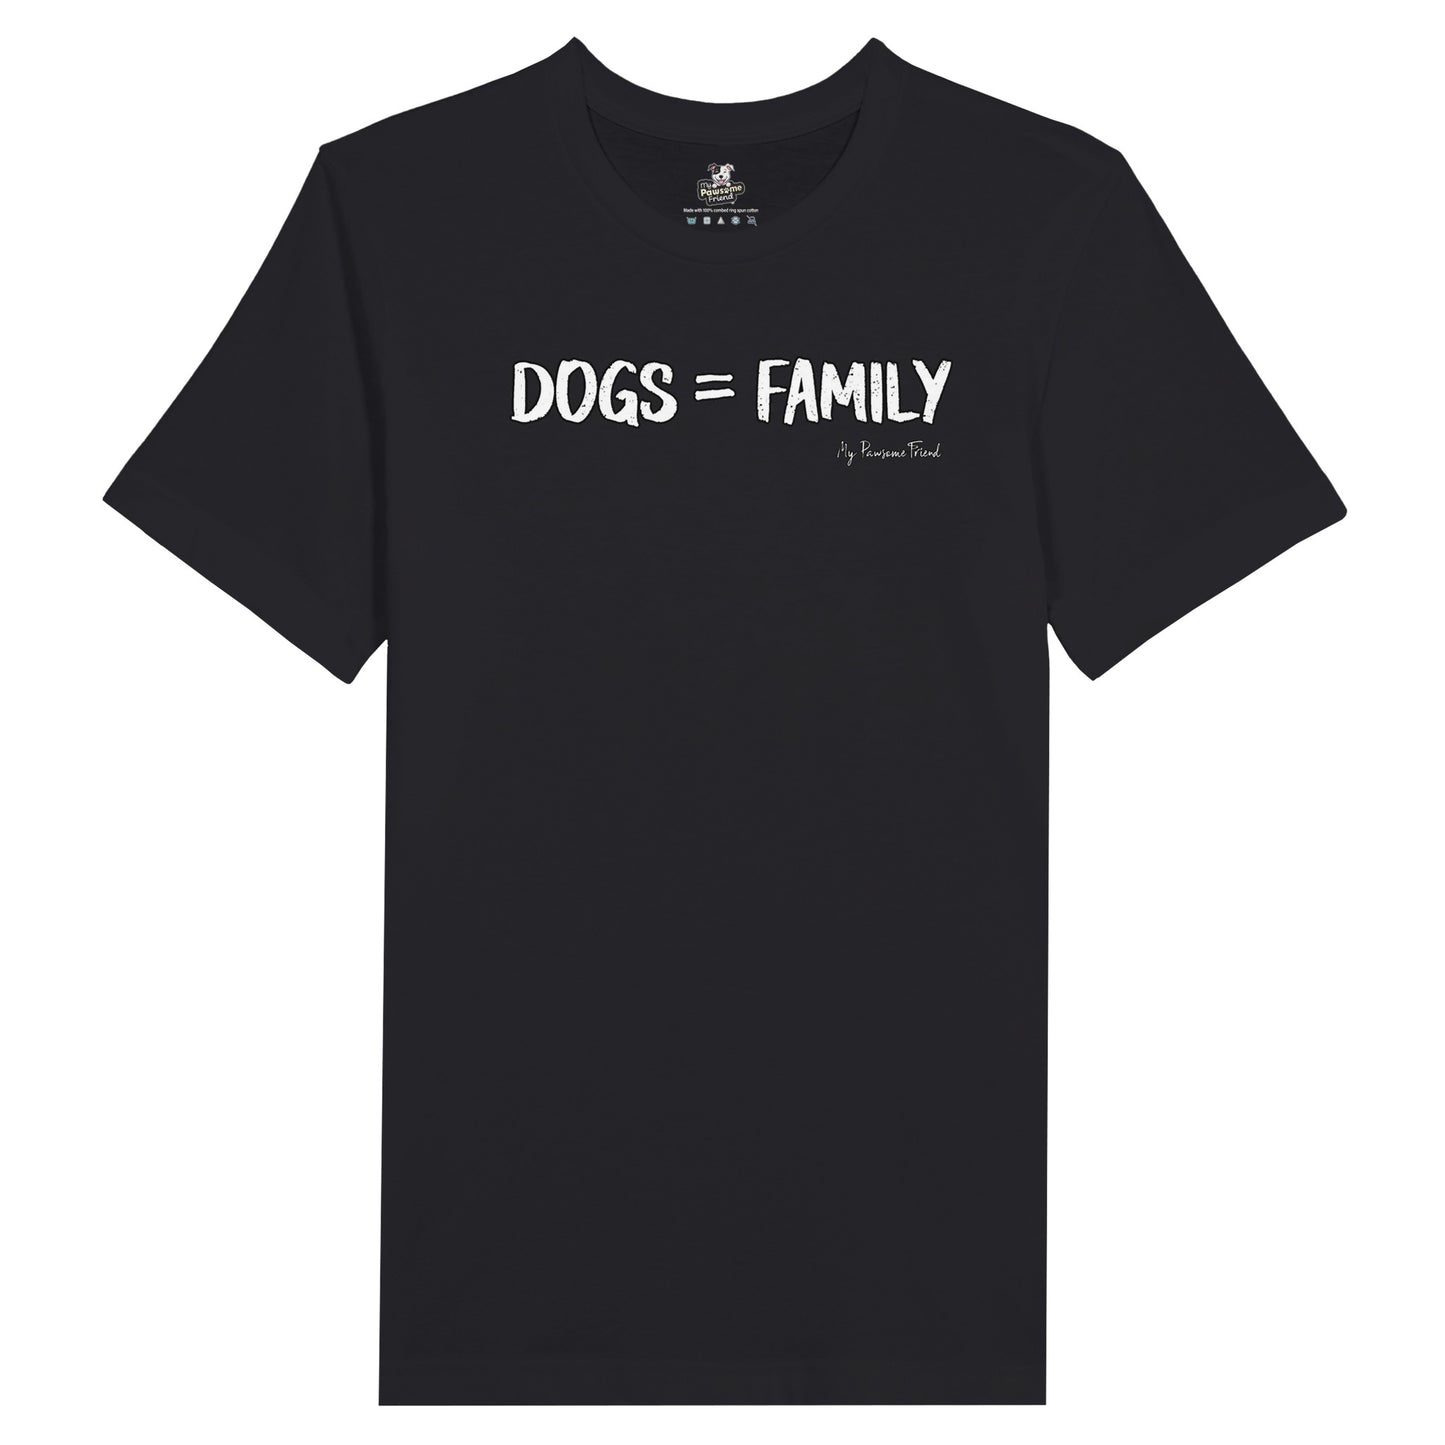 Unisex T-shirt with the message "Dogs = Family". The color of the unisex t-shirt is black